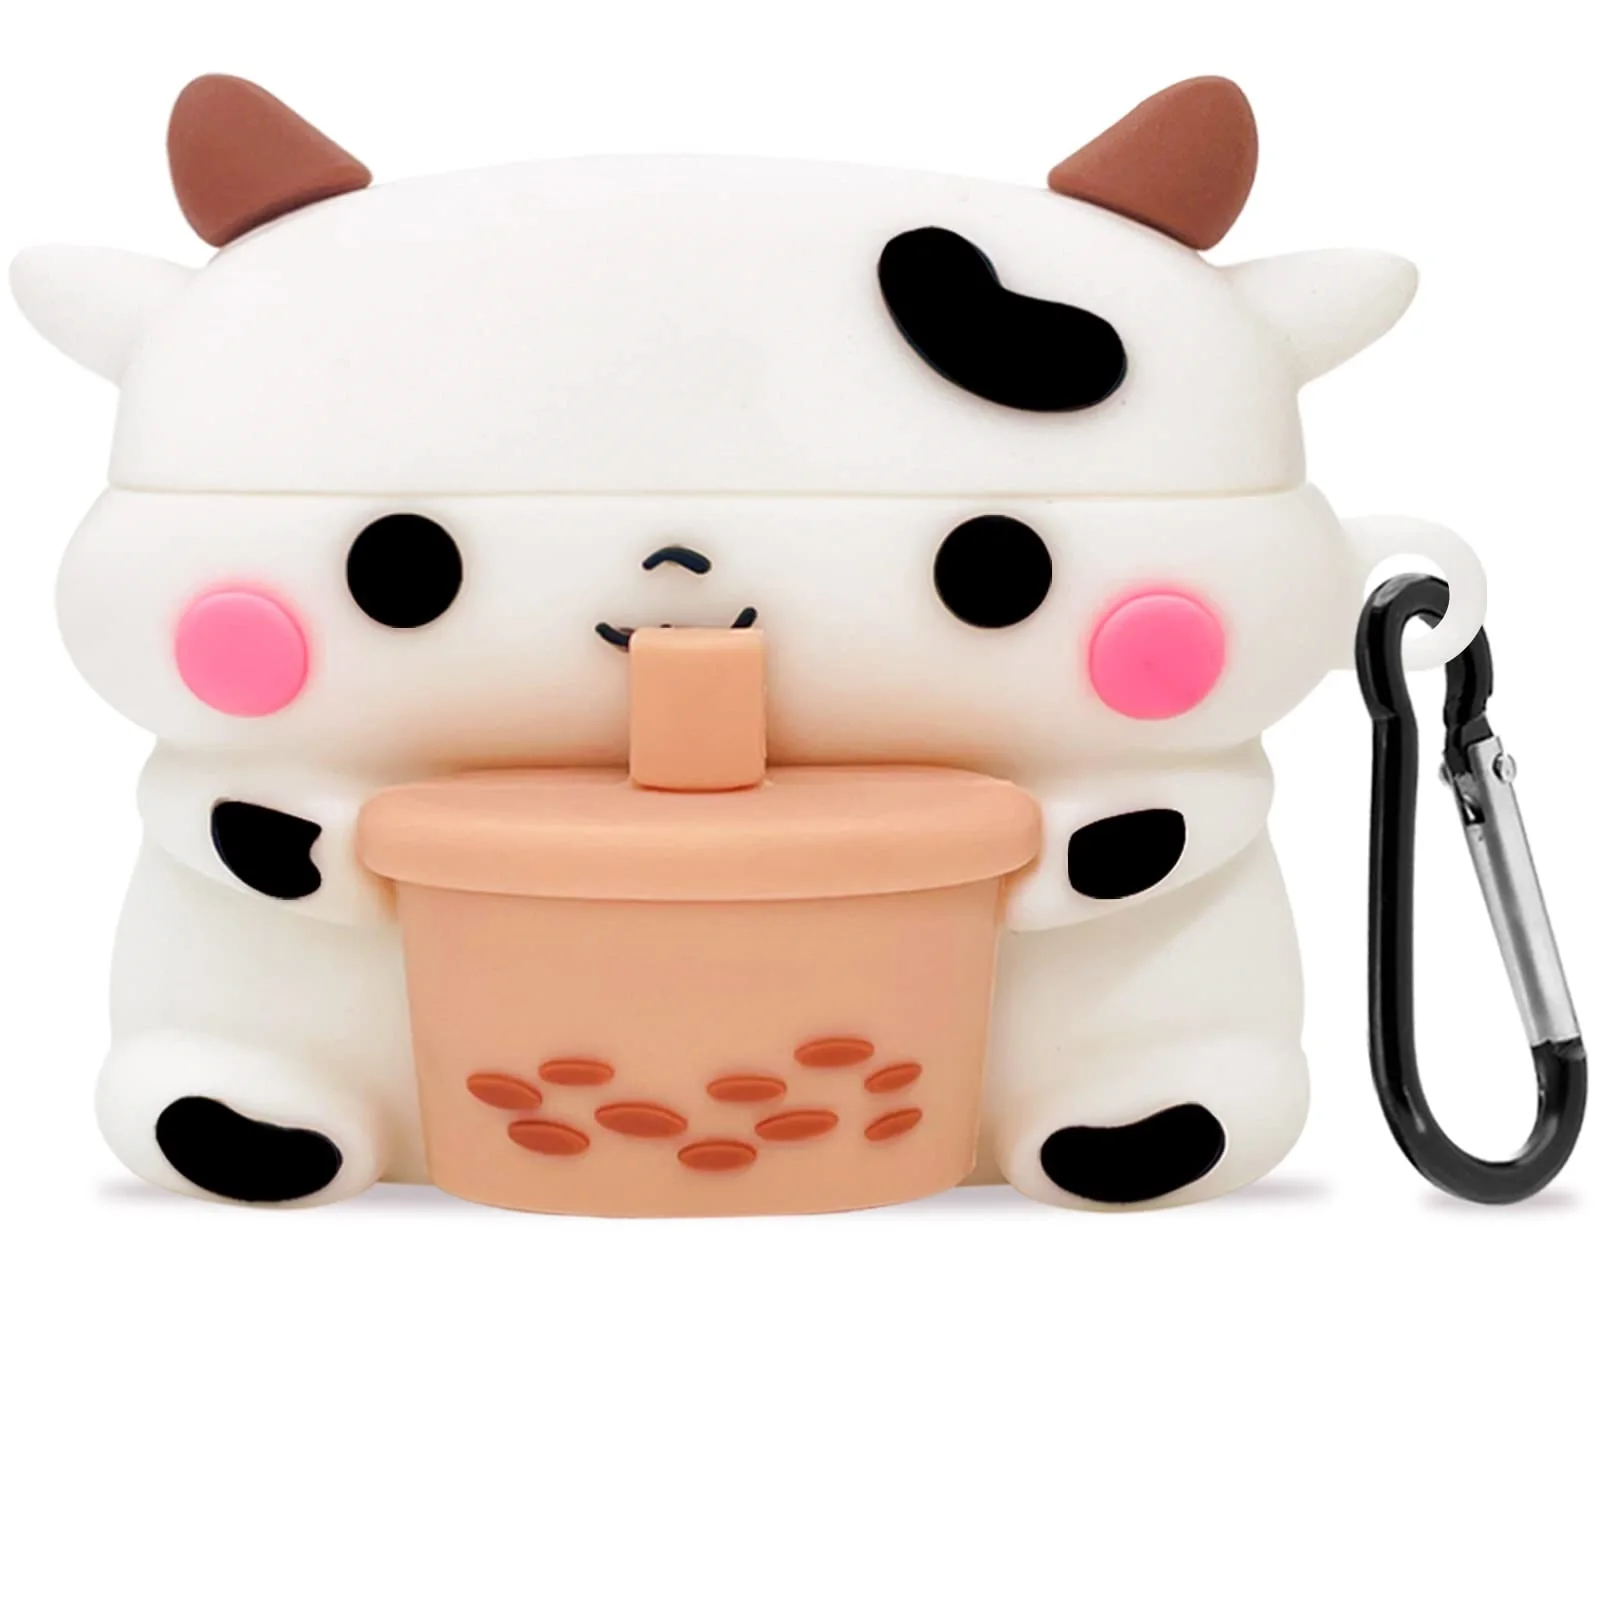 

Boba Tea Cow Cute AirPods Pro Case with Keychain, 3D Cartoon Design Soft Silicone Full Protective Cover for Earphone 123